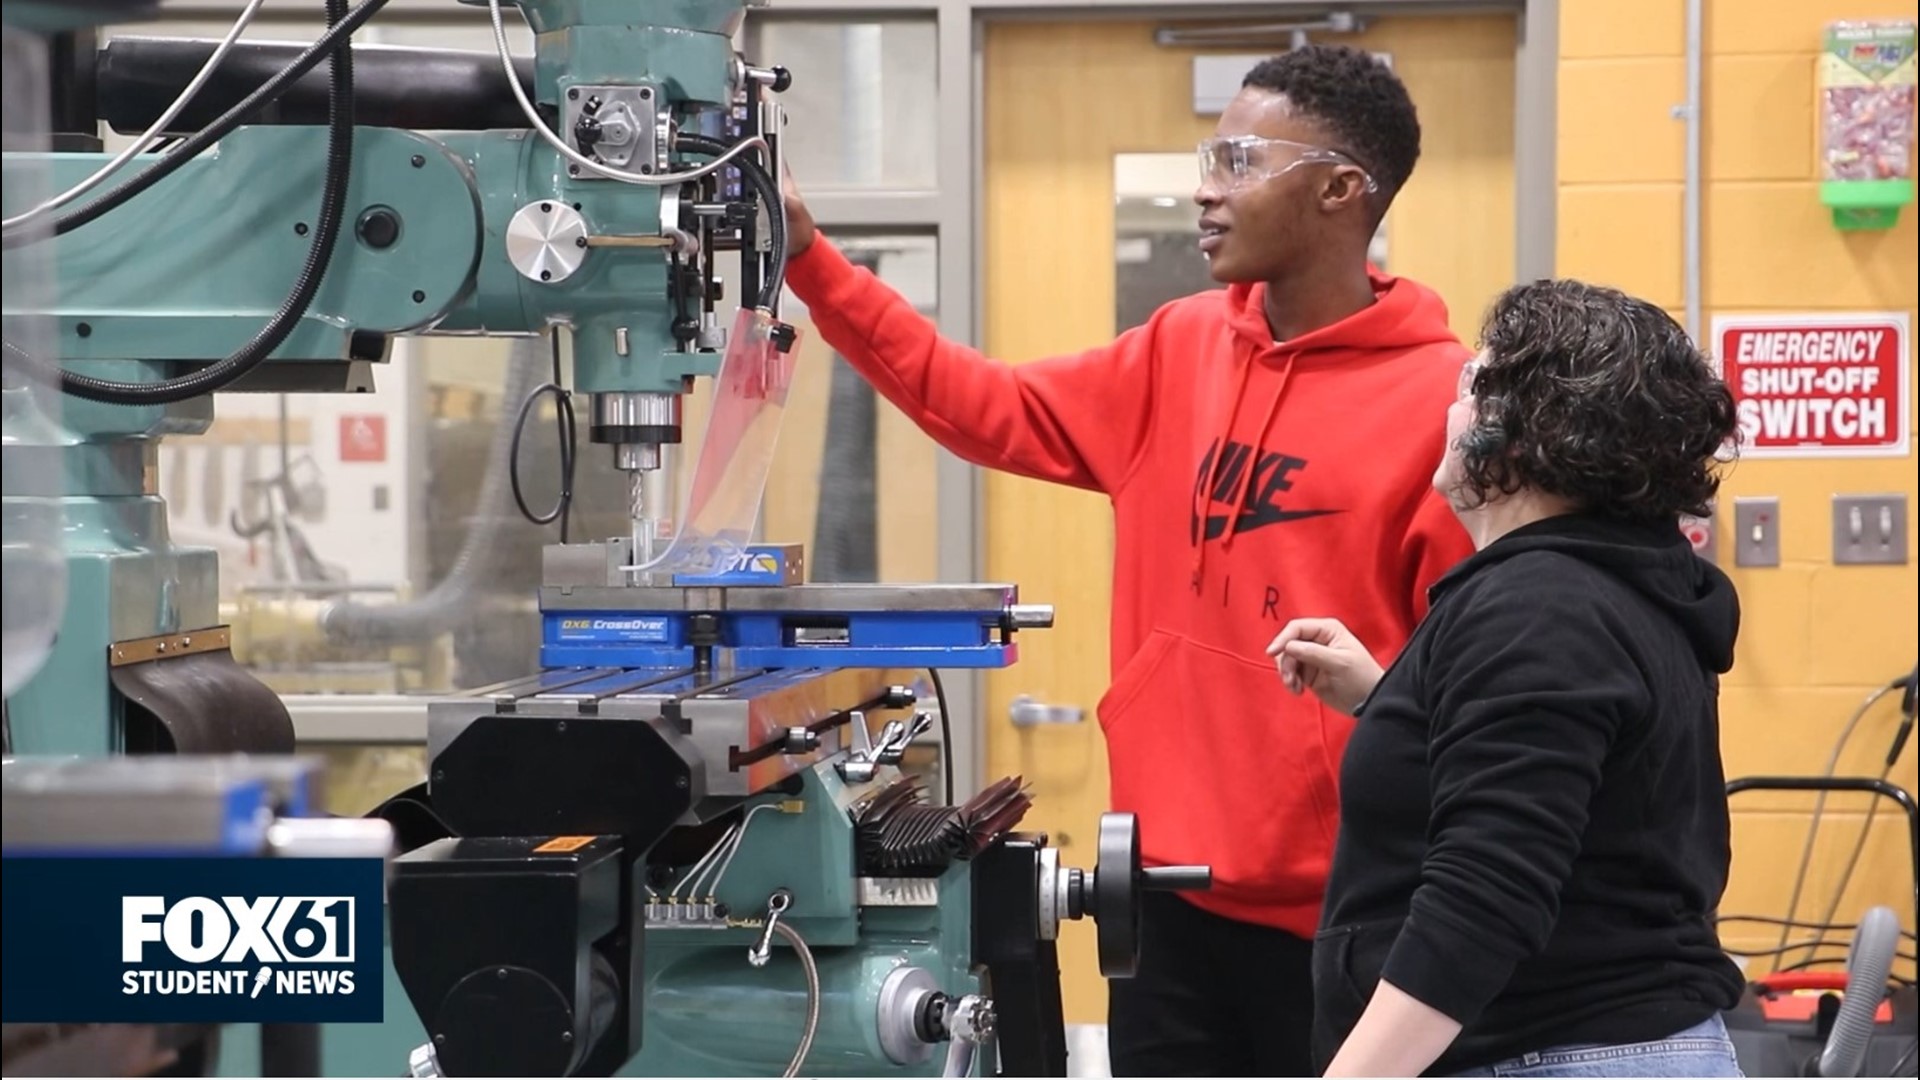 A new manufacturing program is being started at Manchester High School to help encourage students to enter the workforce.